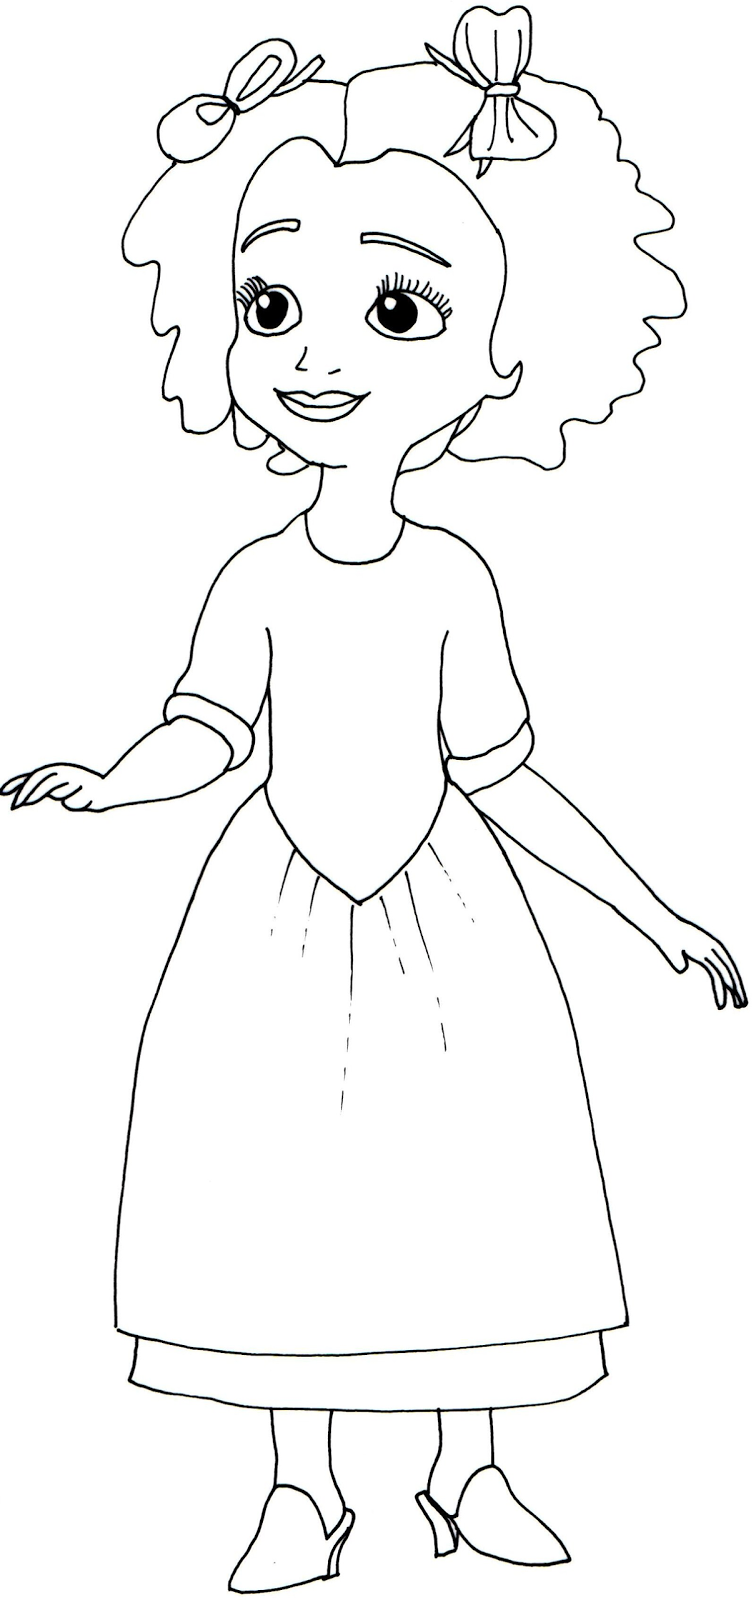 Download Sofia The First Coloring Pages: March 2014